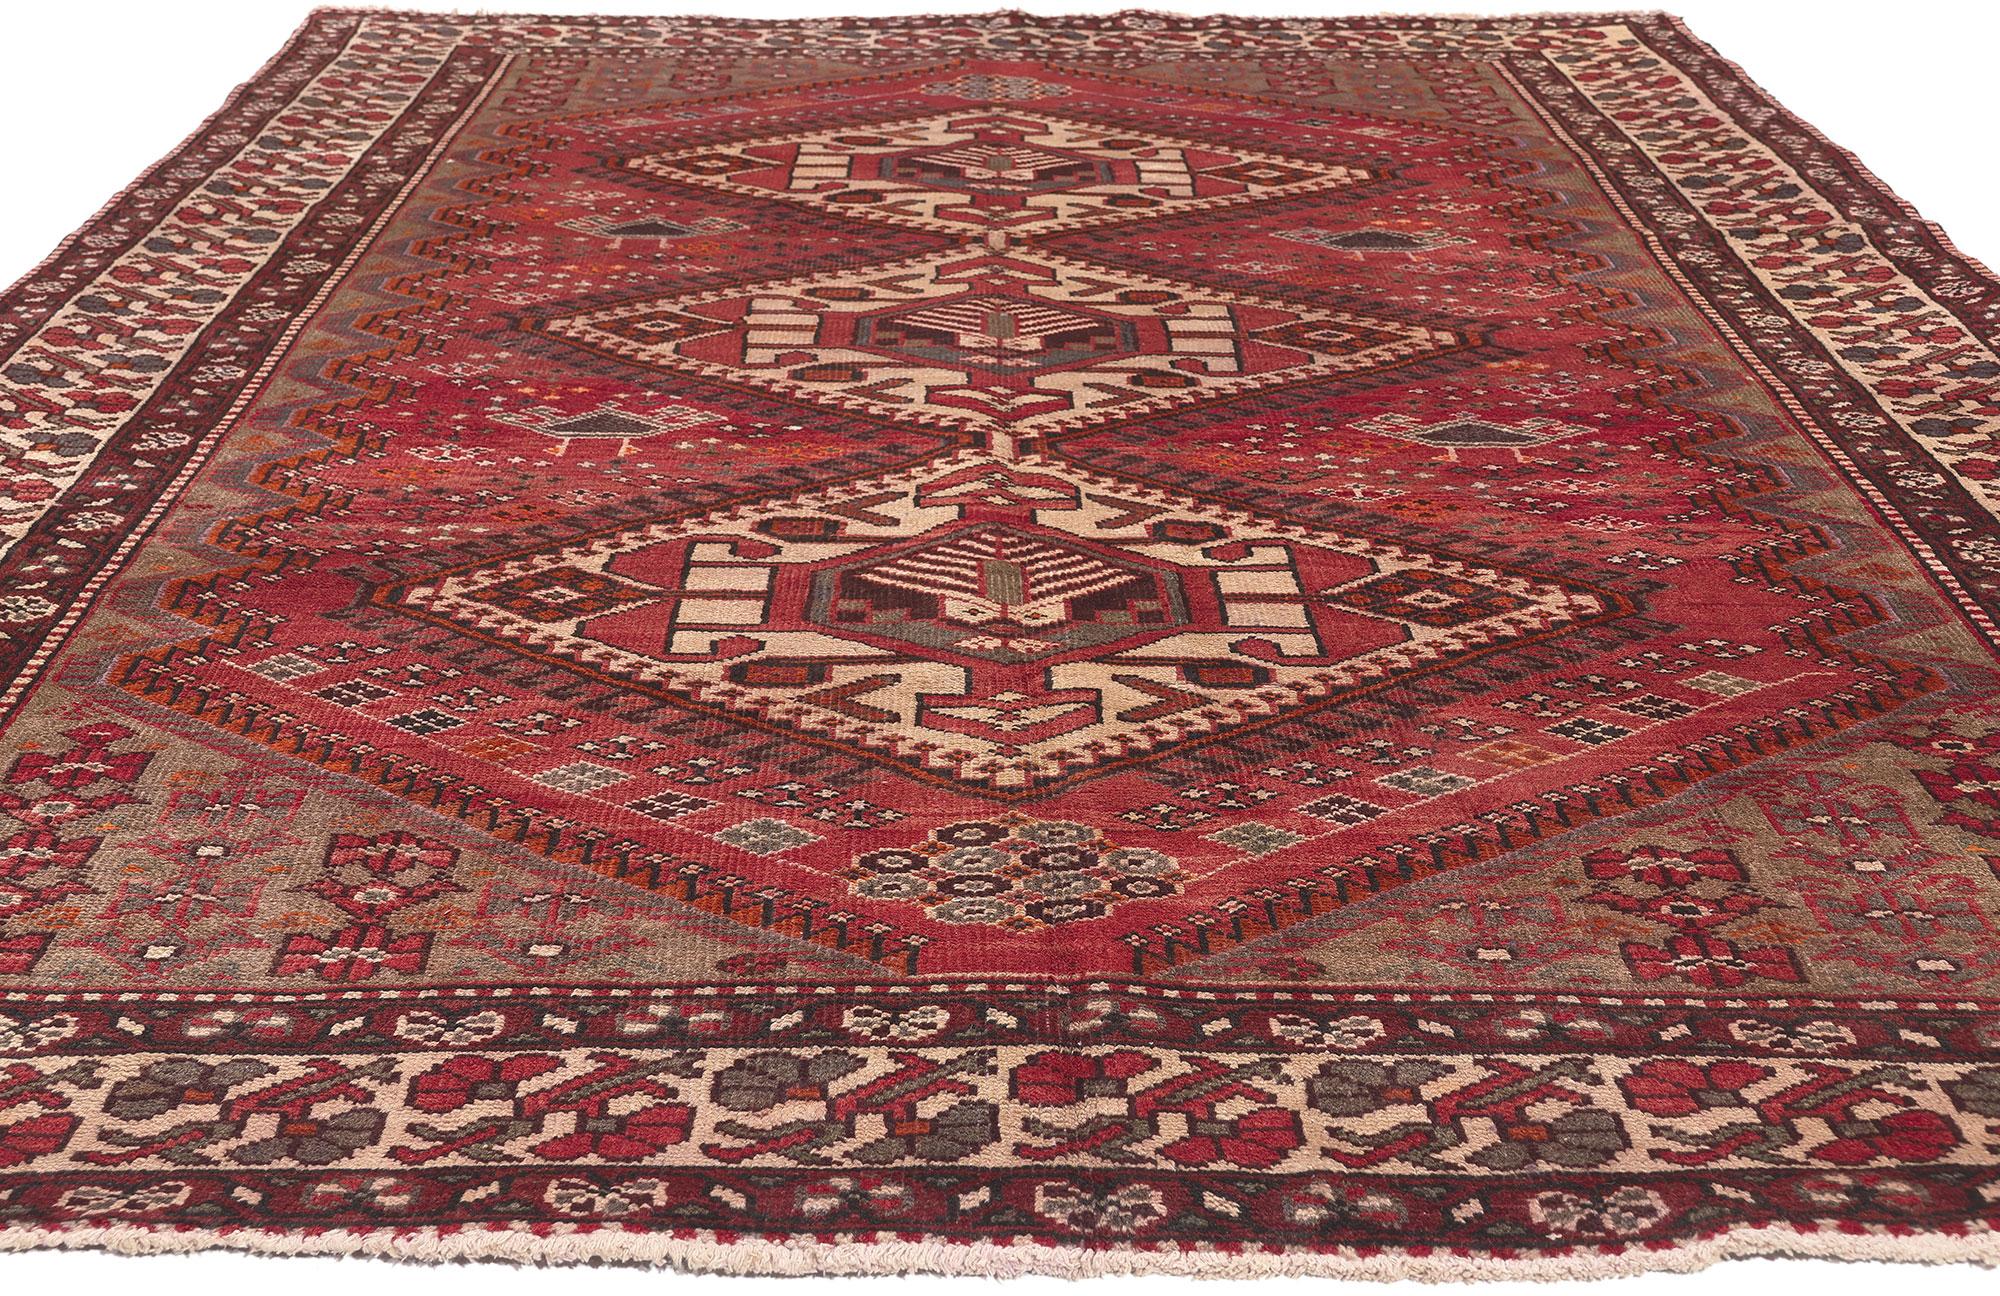 Tribal Vintage Persian Hamadan Rug, Nomadic Charm Meets Decidedly Dramatic For Sale